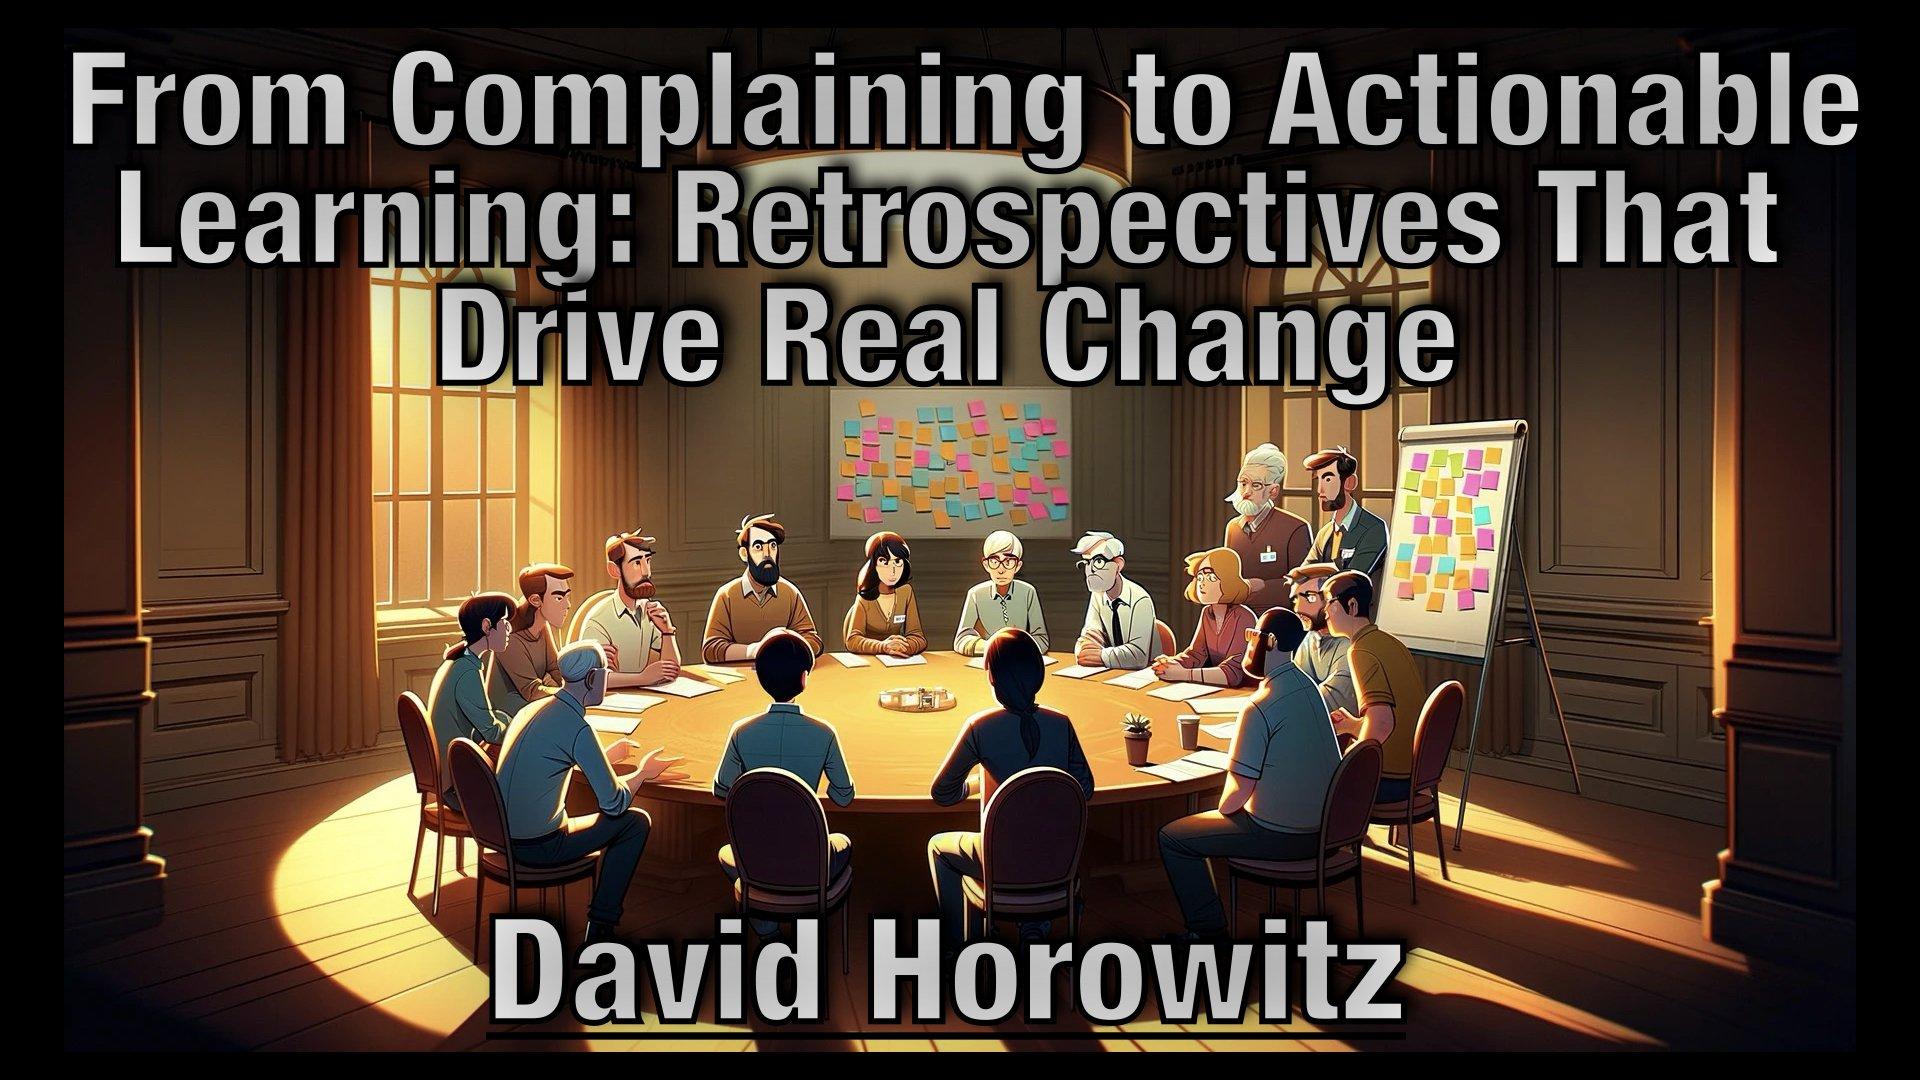  From Complaining to Actionable Learning: Retrospectives That Drive Real Change - David Horowitz